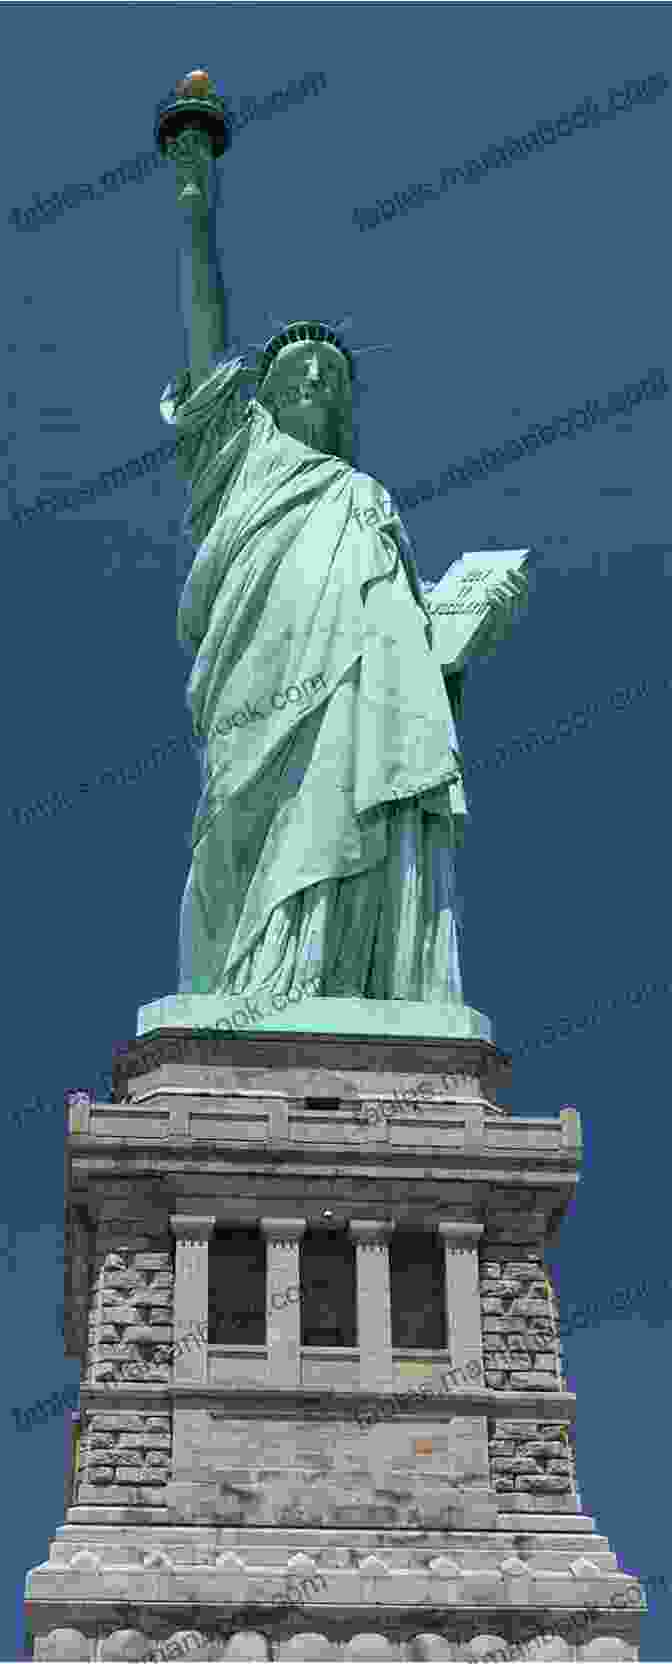 A Symbolic Image Of The Statue Of Liberty And The Words 'Liberty' And 'Equality' The Man Who Understood Democracy: The Life Of Alexis De Tocqueville